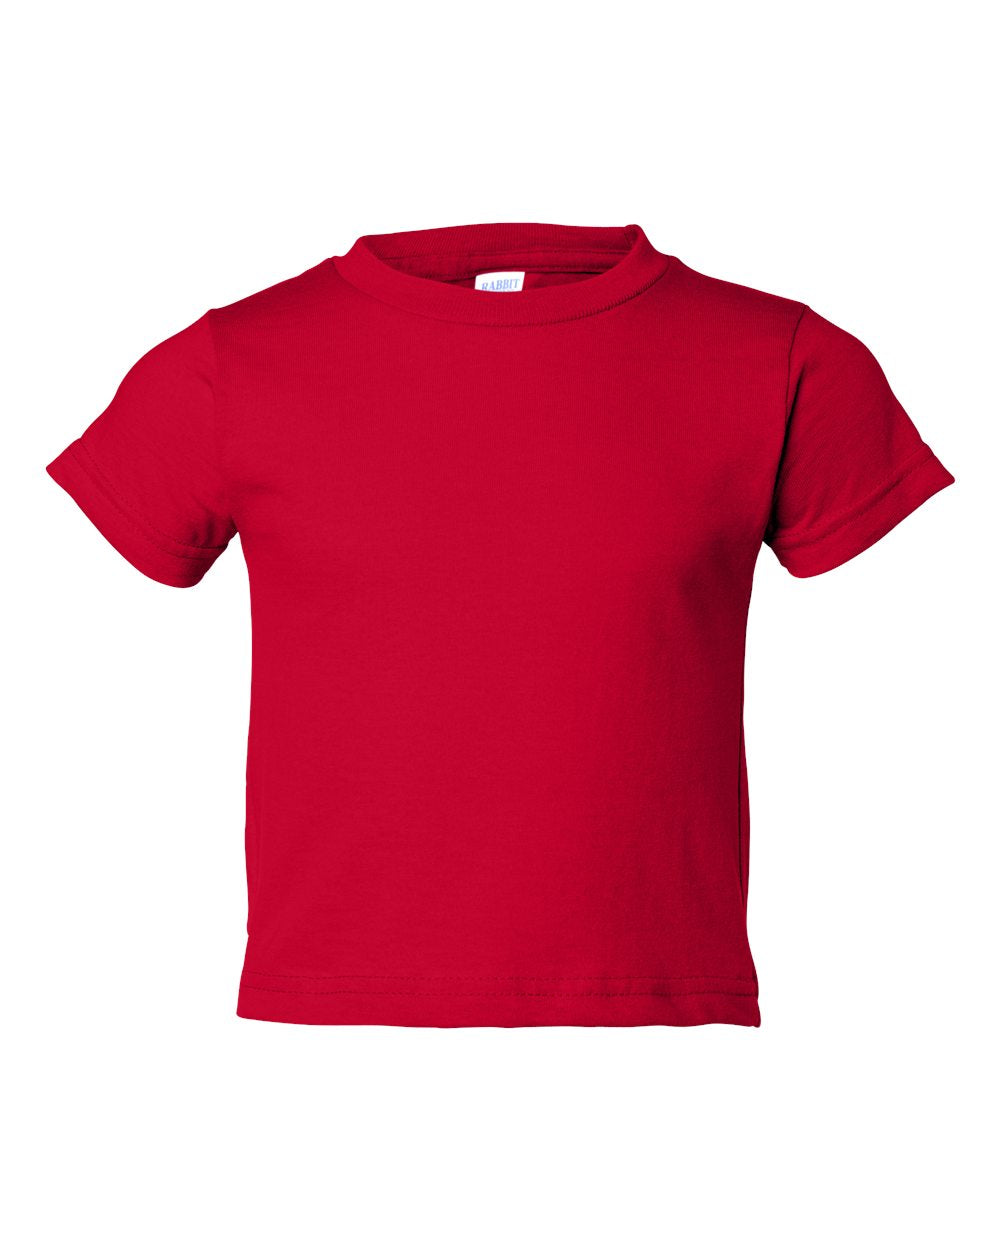 Rabbit Skins Toddler Cotton Jersey Tee 3301T #color_Red